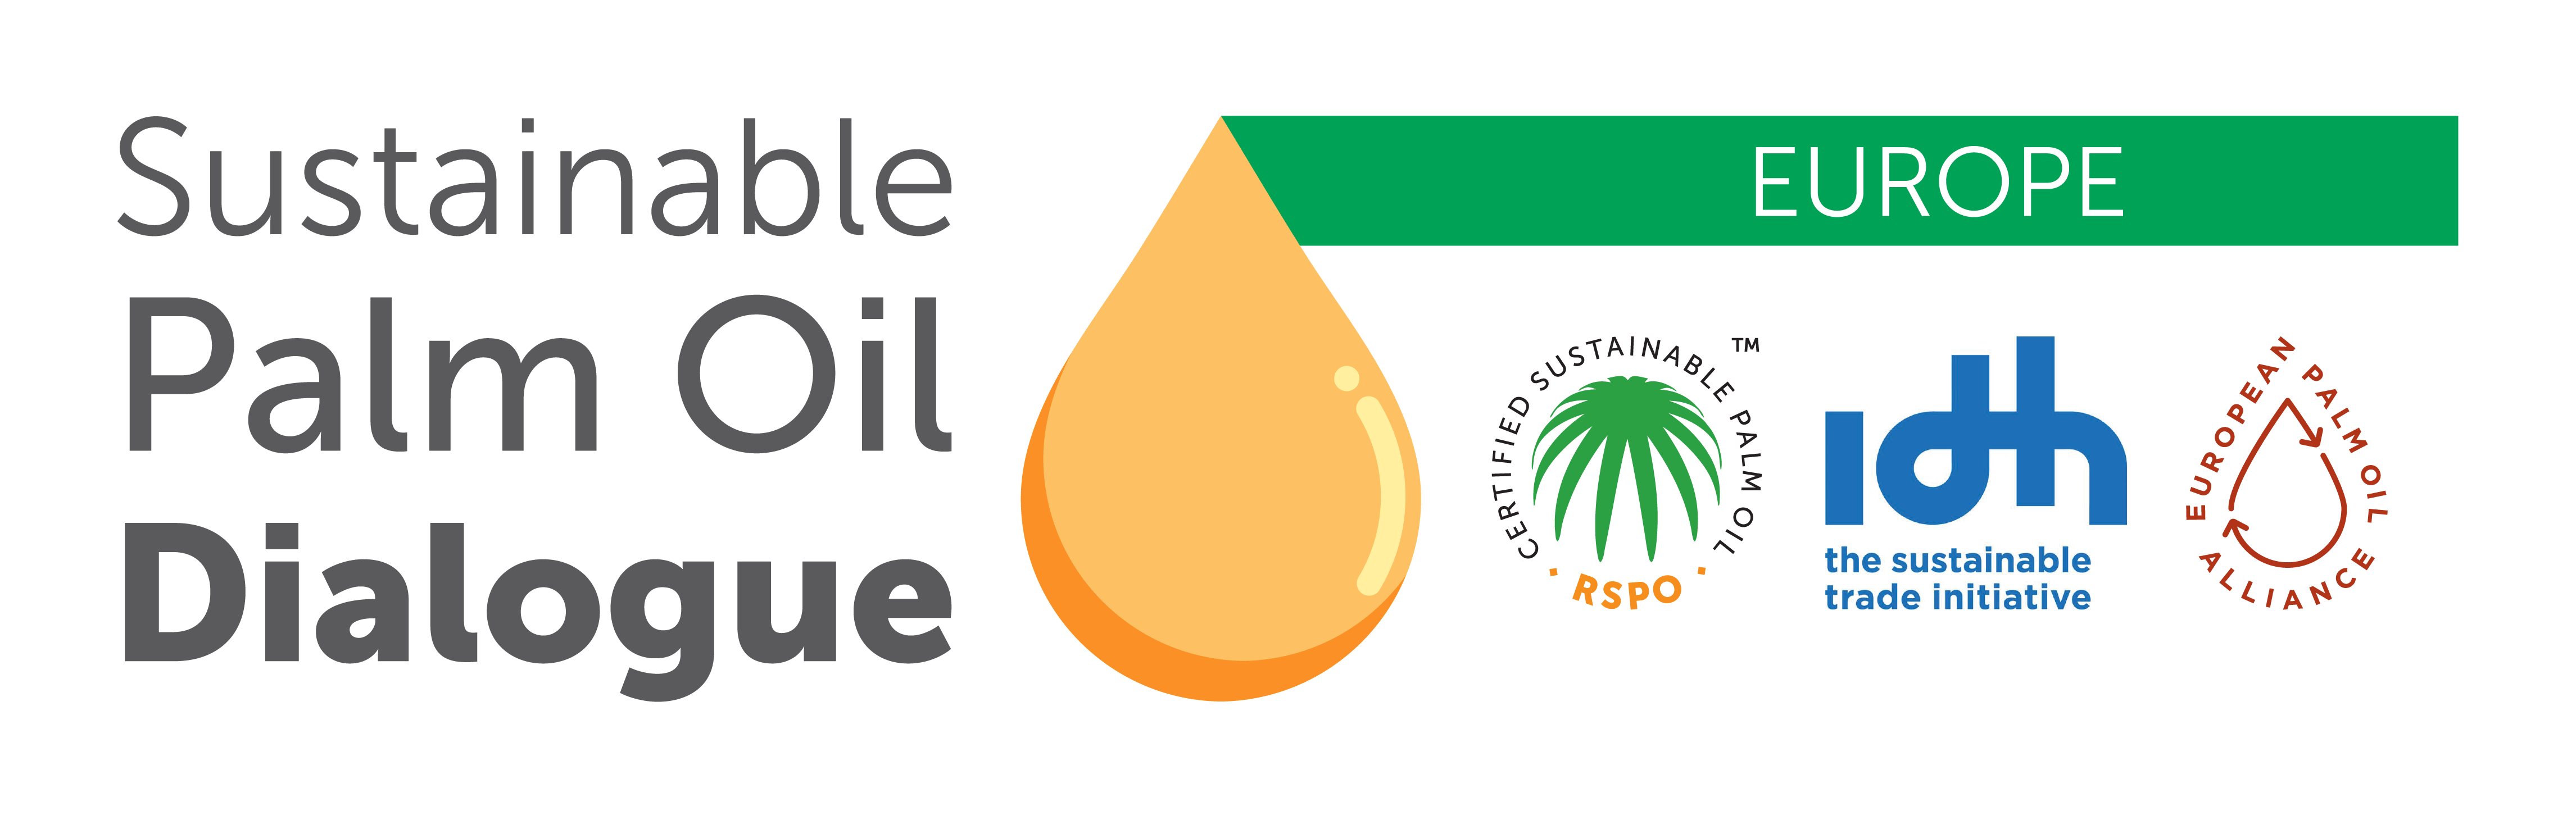 Logo Sustainable Palm Oil Dialogue Europe